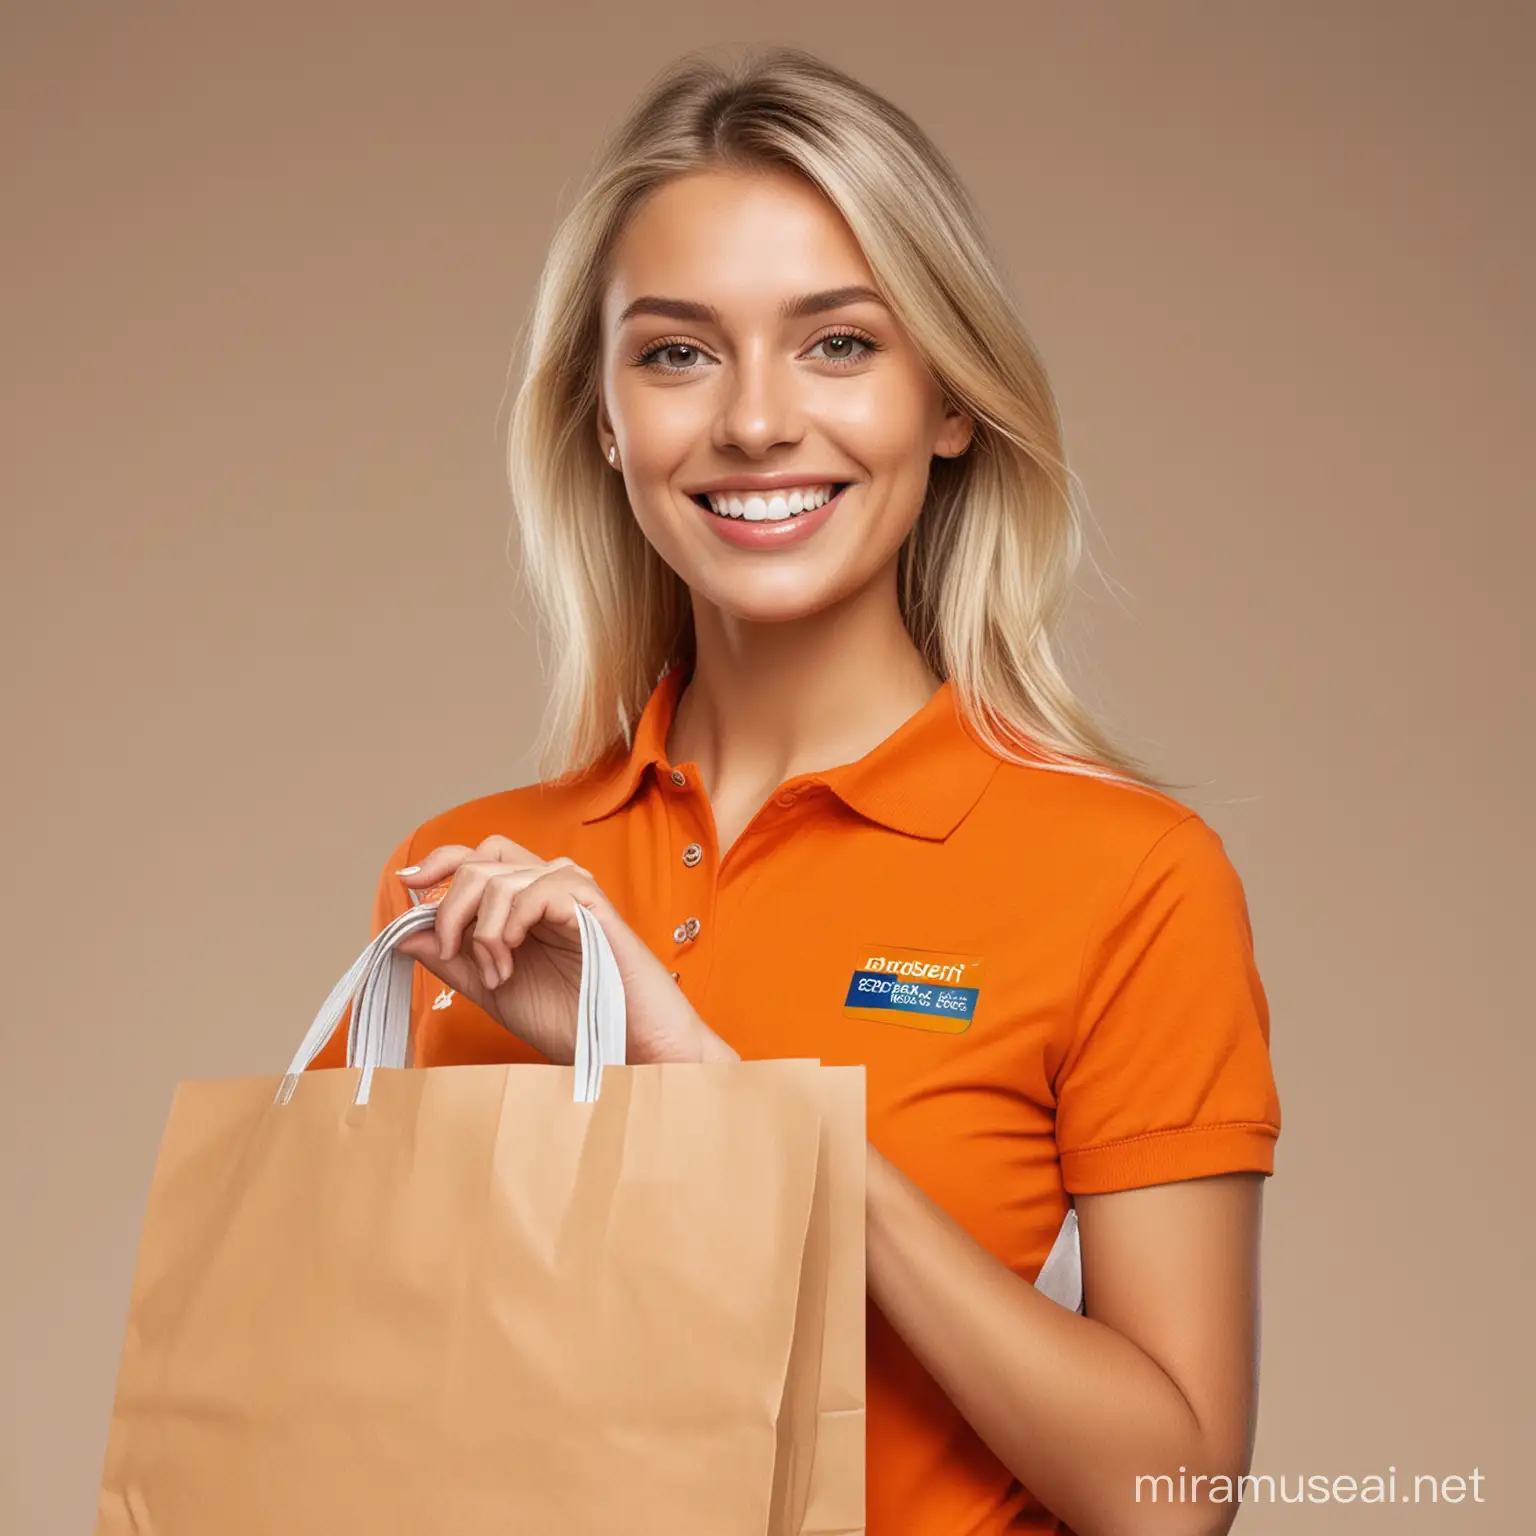 Ana is the model for Zama Express, she is a smiling blonde, she wears an orange polo shirt without any design or logo, the shirt cannot have any design or logo it just needs to be completely orange, she holds an orange shopping bag in the right hand and left hand holds a credit card